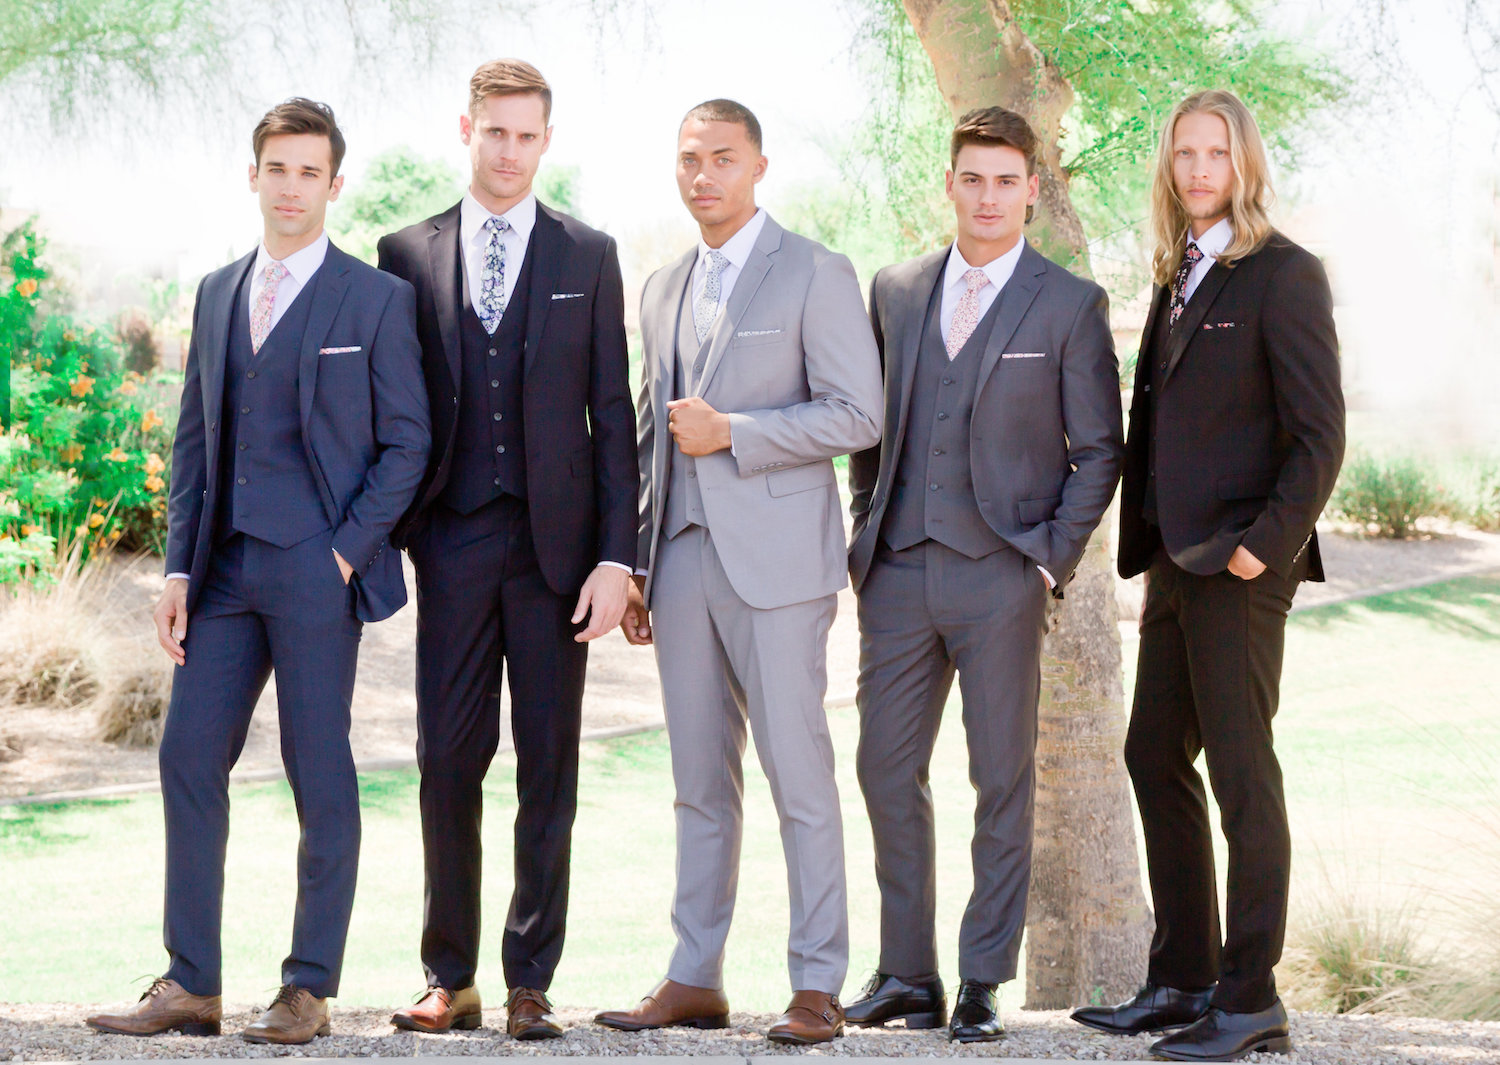 Groom and Groomsmen Suits Made Easy with The Modern Groom via TheELD.com